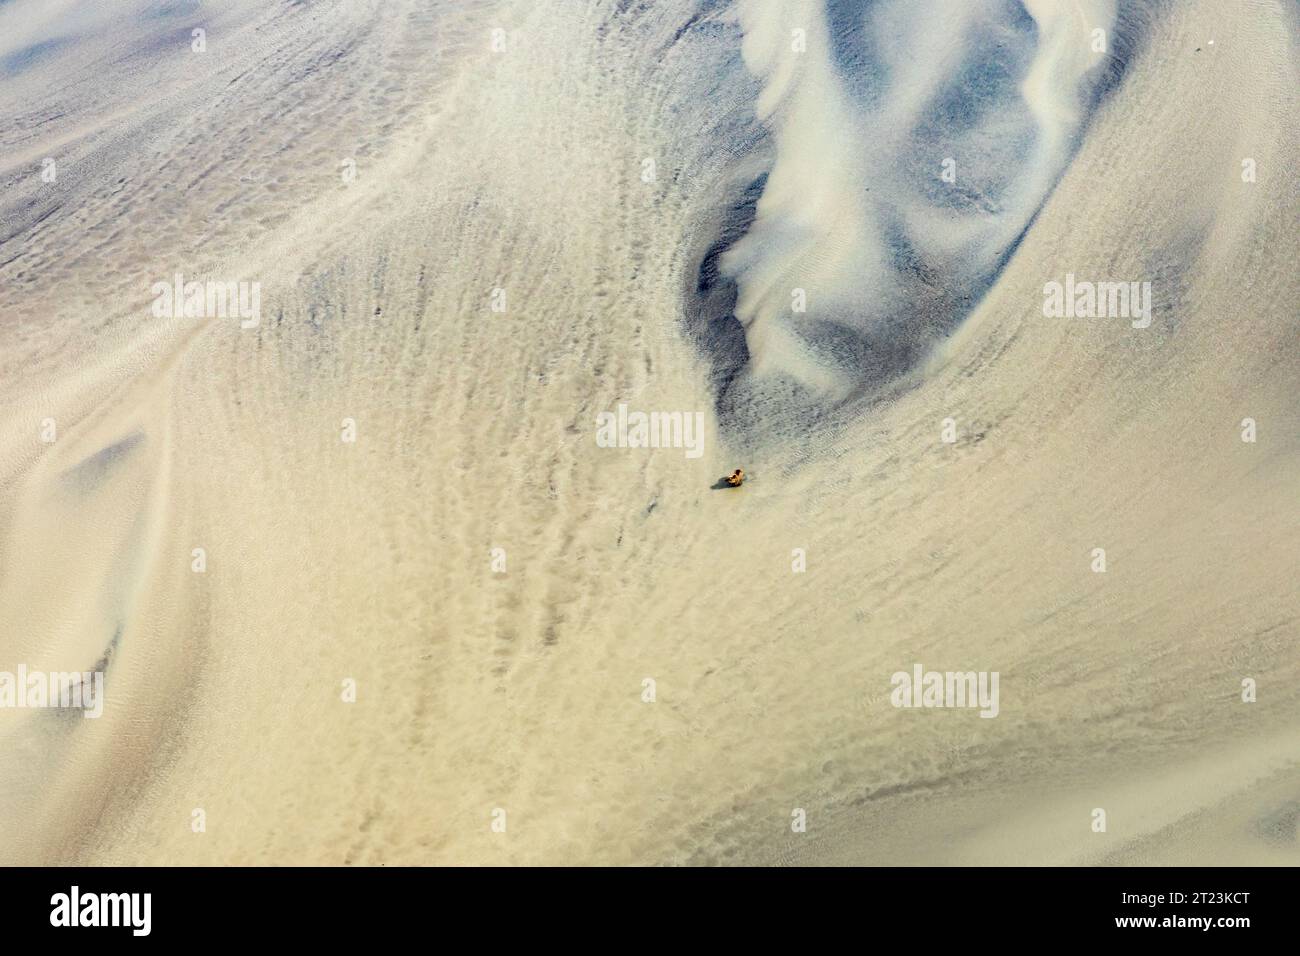 Abstract aerial view of grizzly bear, Ursus arctos horribilis, foraging for clams in a tidal river delta Stock Photo